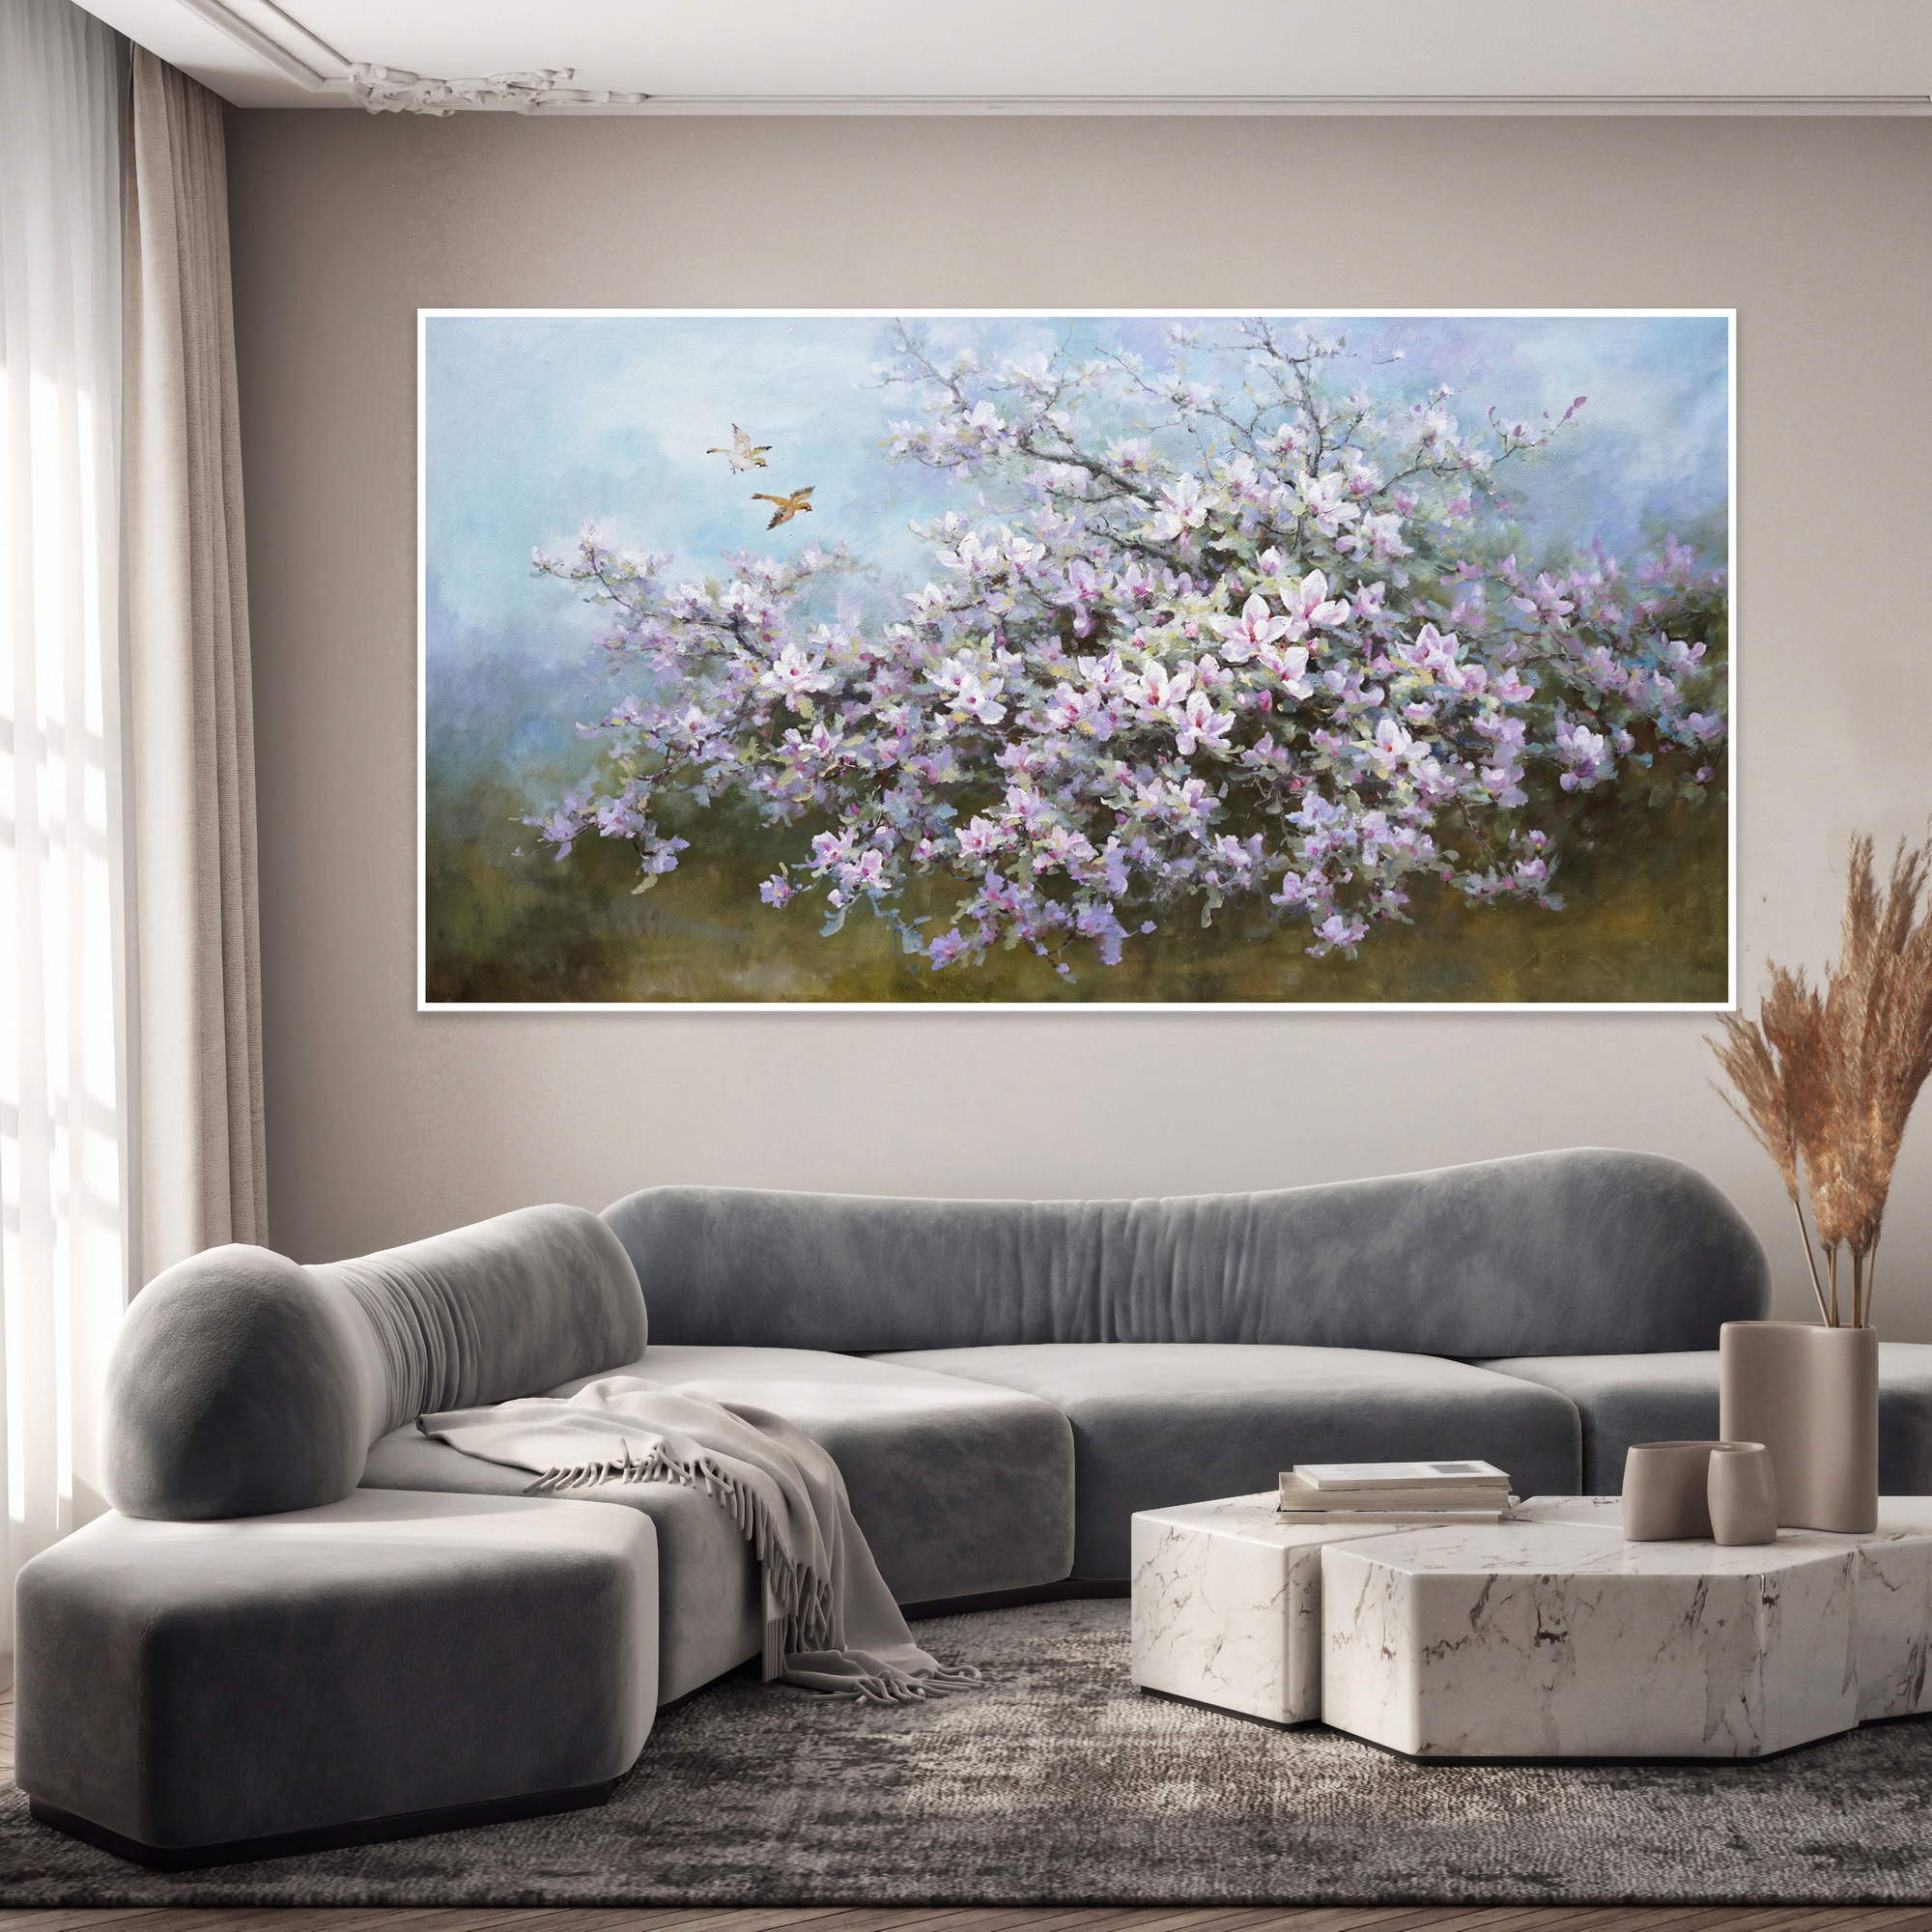 Hand painted Nature Magnolias in Bloom 90x180cm